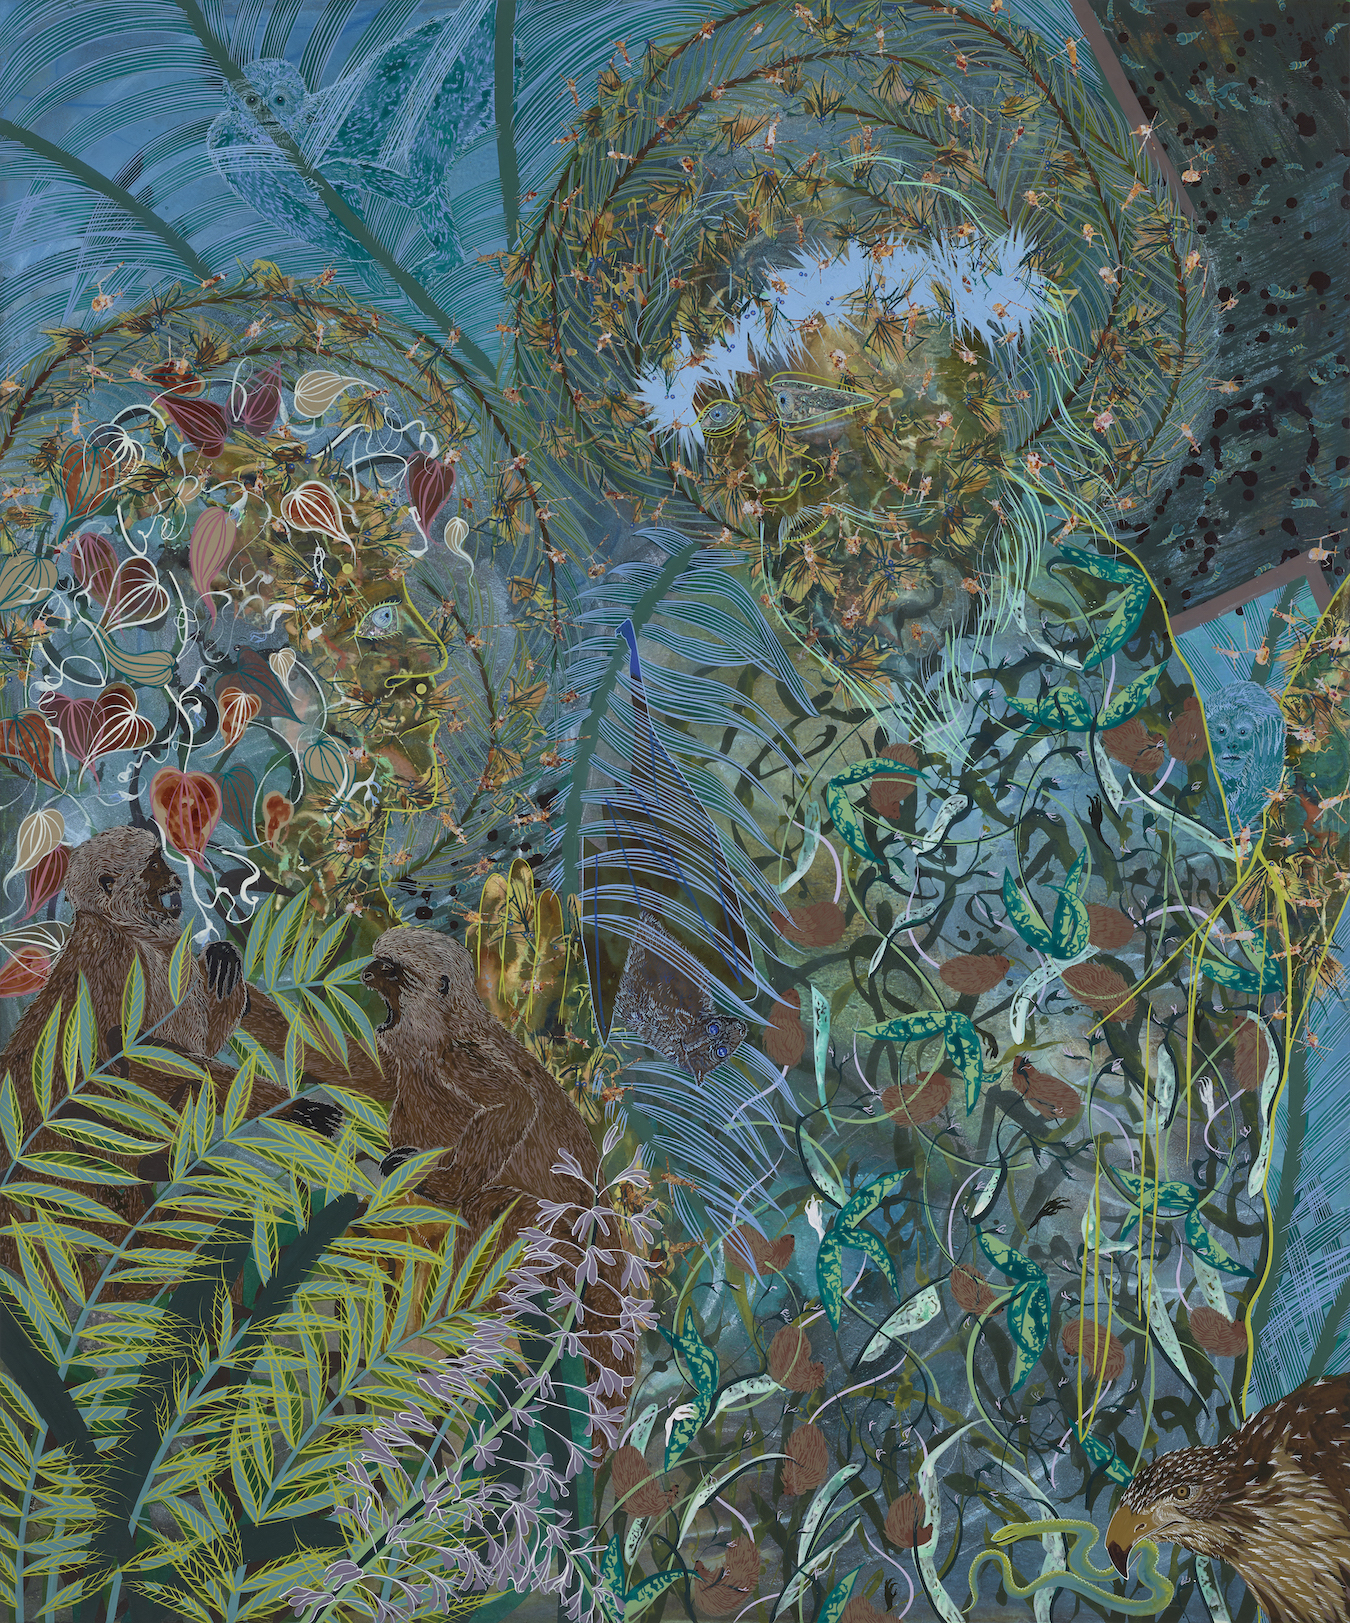 A colorful display of shapes and leaves that are green, blue, brown, and purple create the forms of a man and woman with halos. The background is filled with a brown hawk, blue monkeys, and blue leaves.